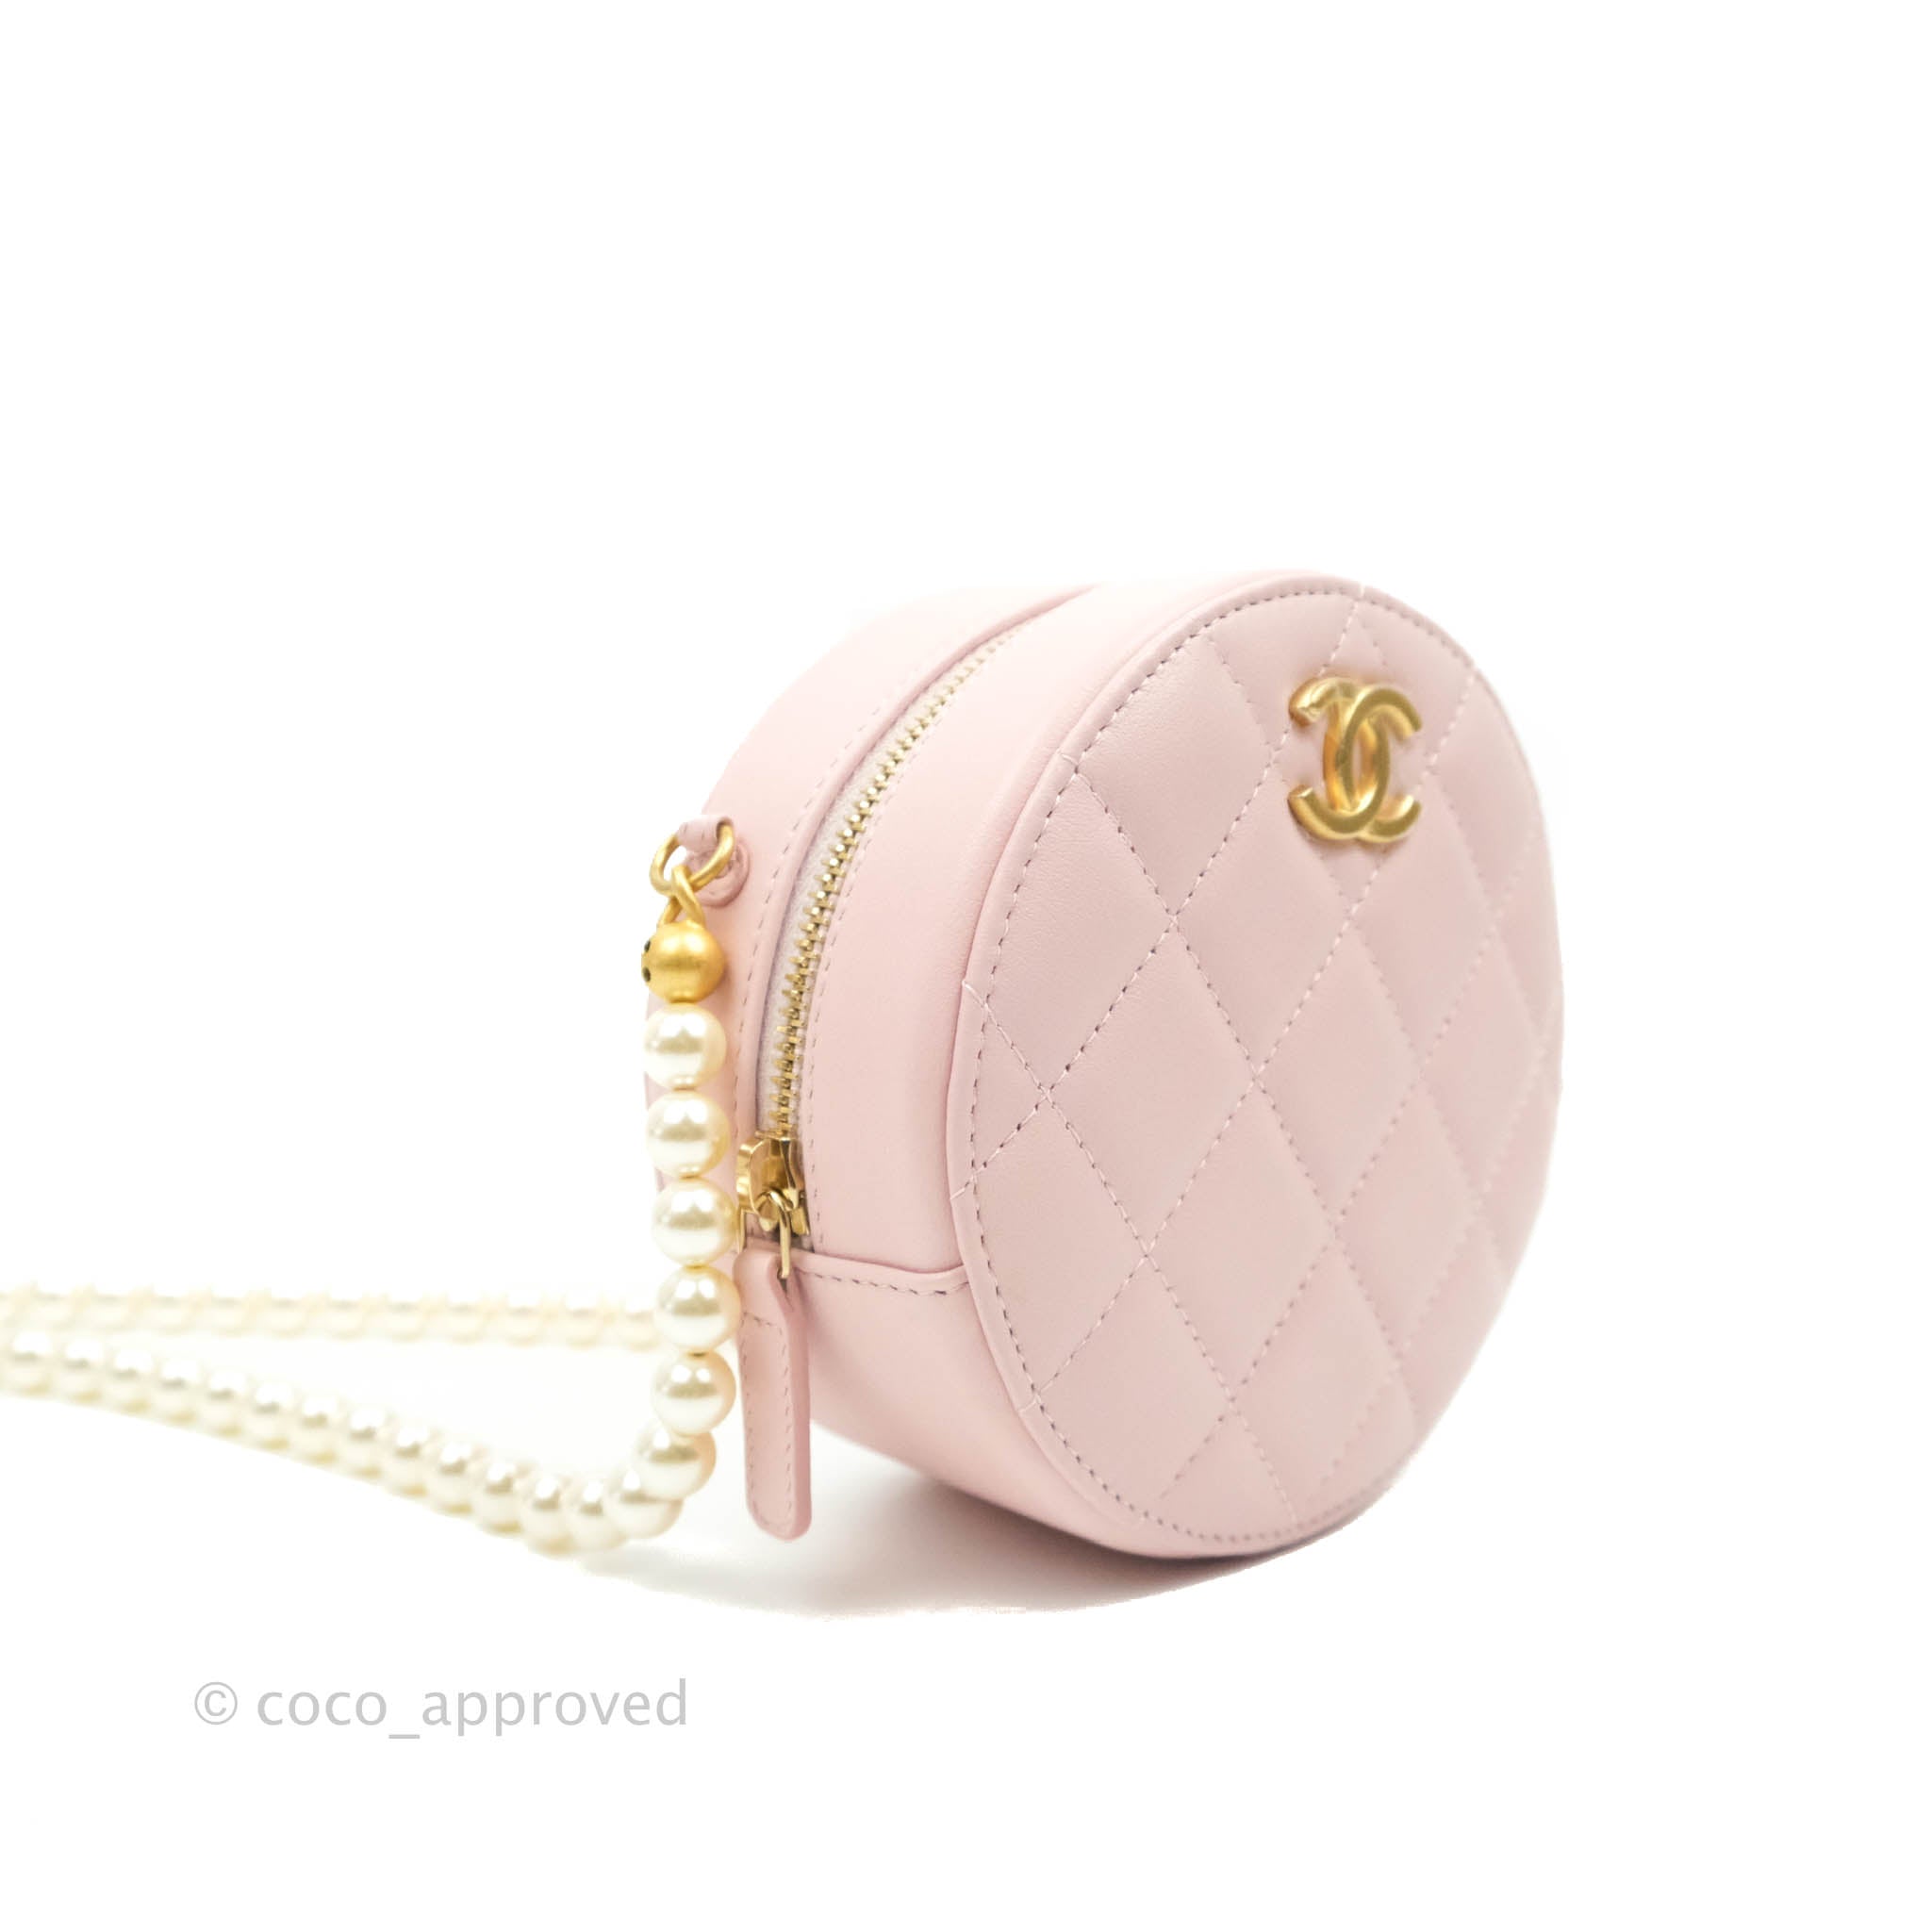 CHANEL White Clutch Bags & Handbags for Women, Authenticity Guaranteed